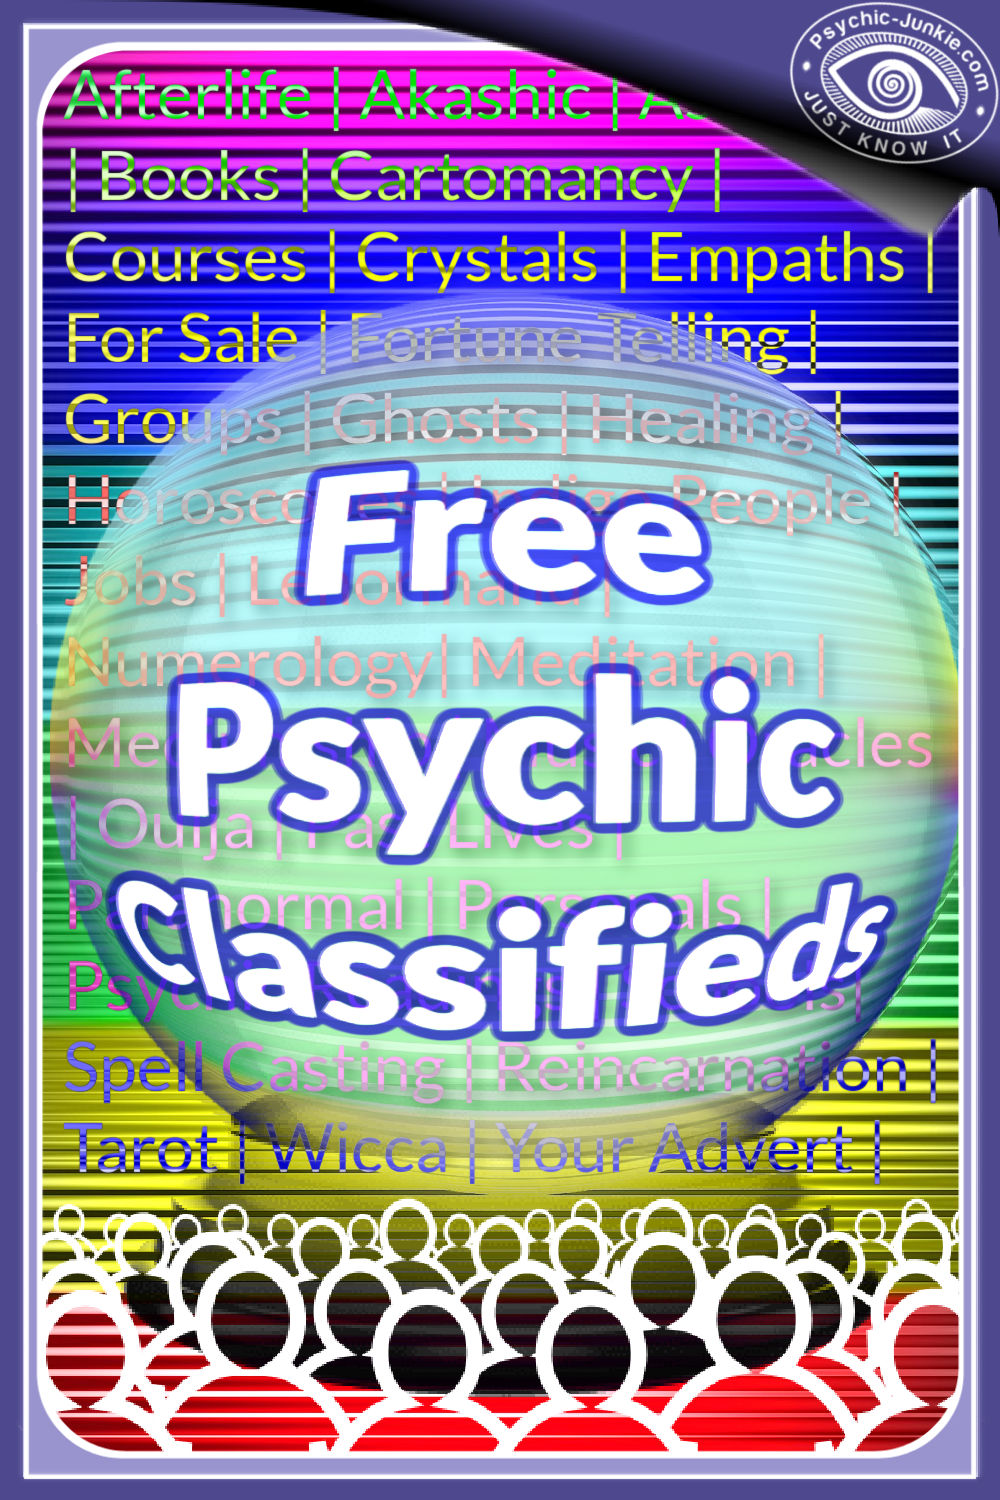 Your Free Psychic Classifieds